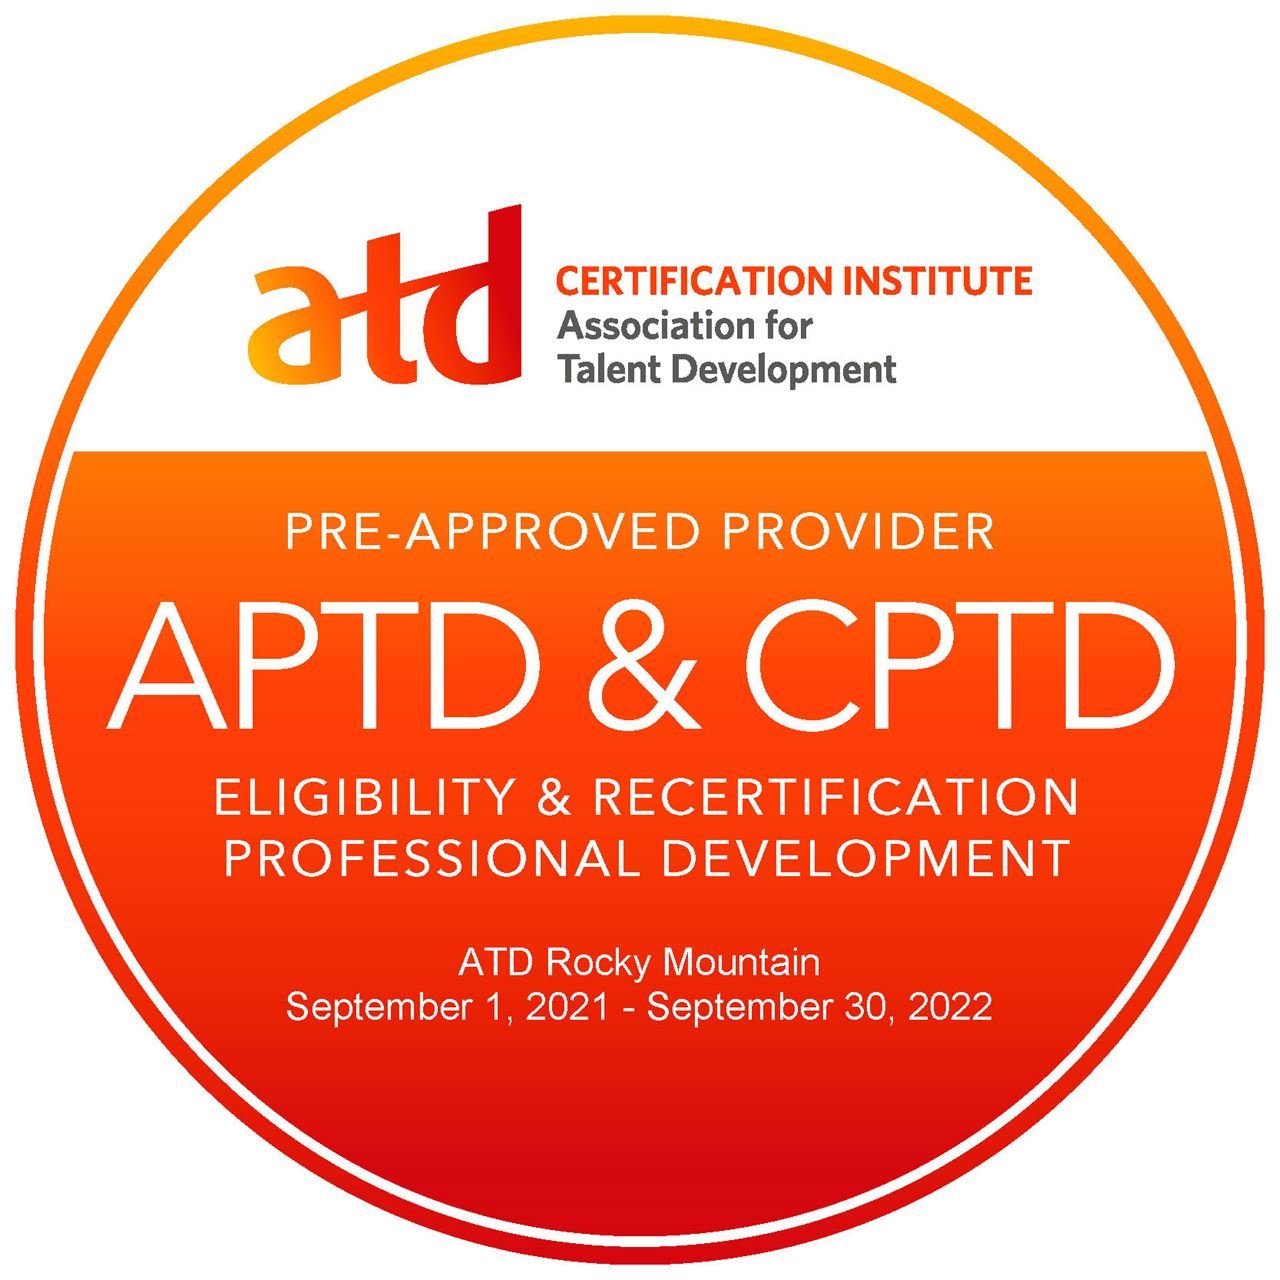 ATD RMC is a pre-approved provider for APTD and & CPTD Certification from 9/1/2021 to 0/30/2022.